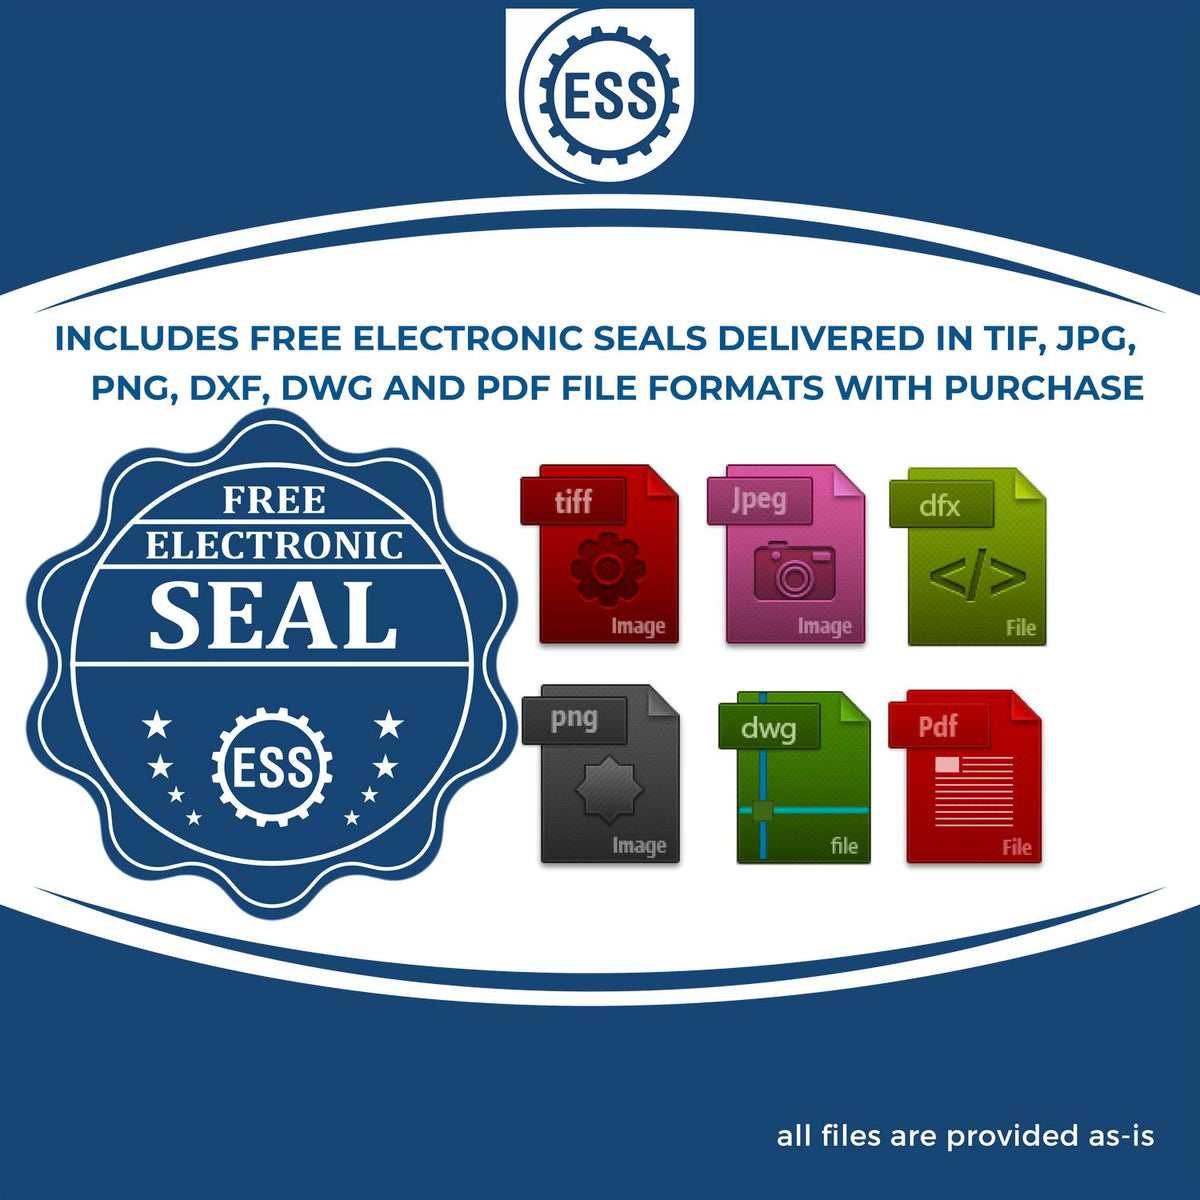 An infographic for the free electronic seal for the Michigan Engineer Desk Seal illustrating the different file type icons such as DXF, DWG, TIF, JPG and PNG.